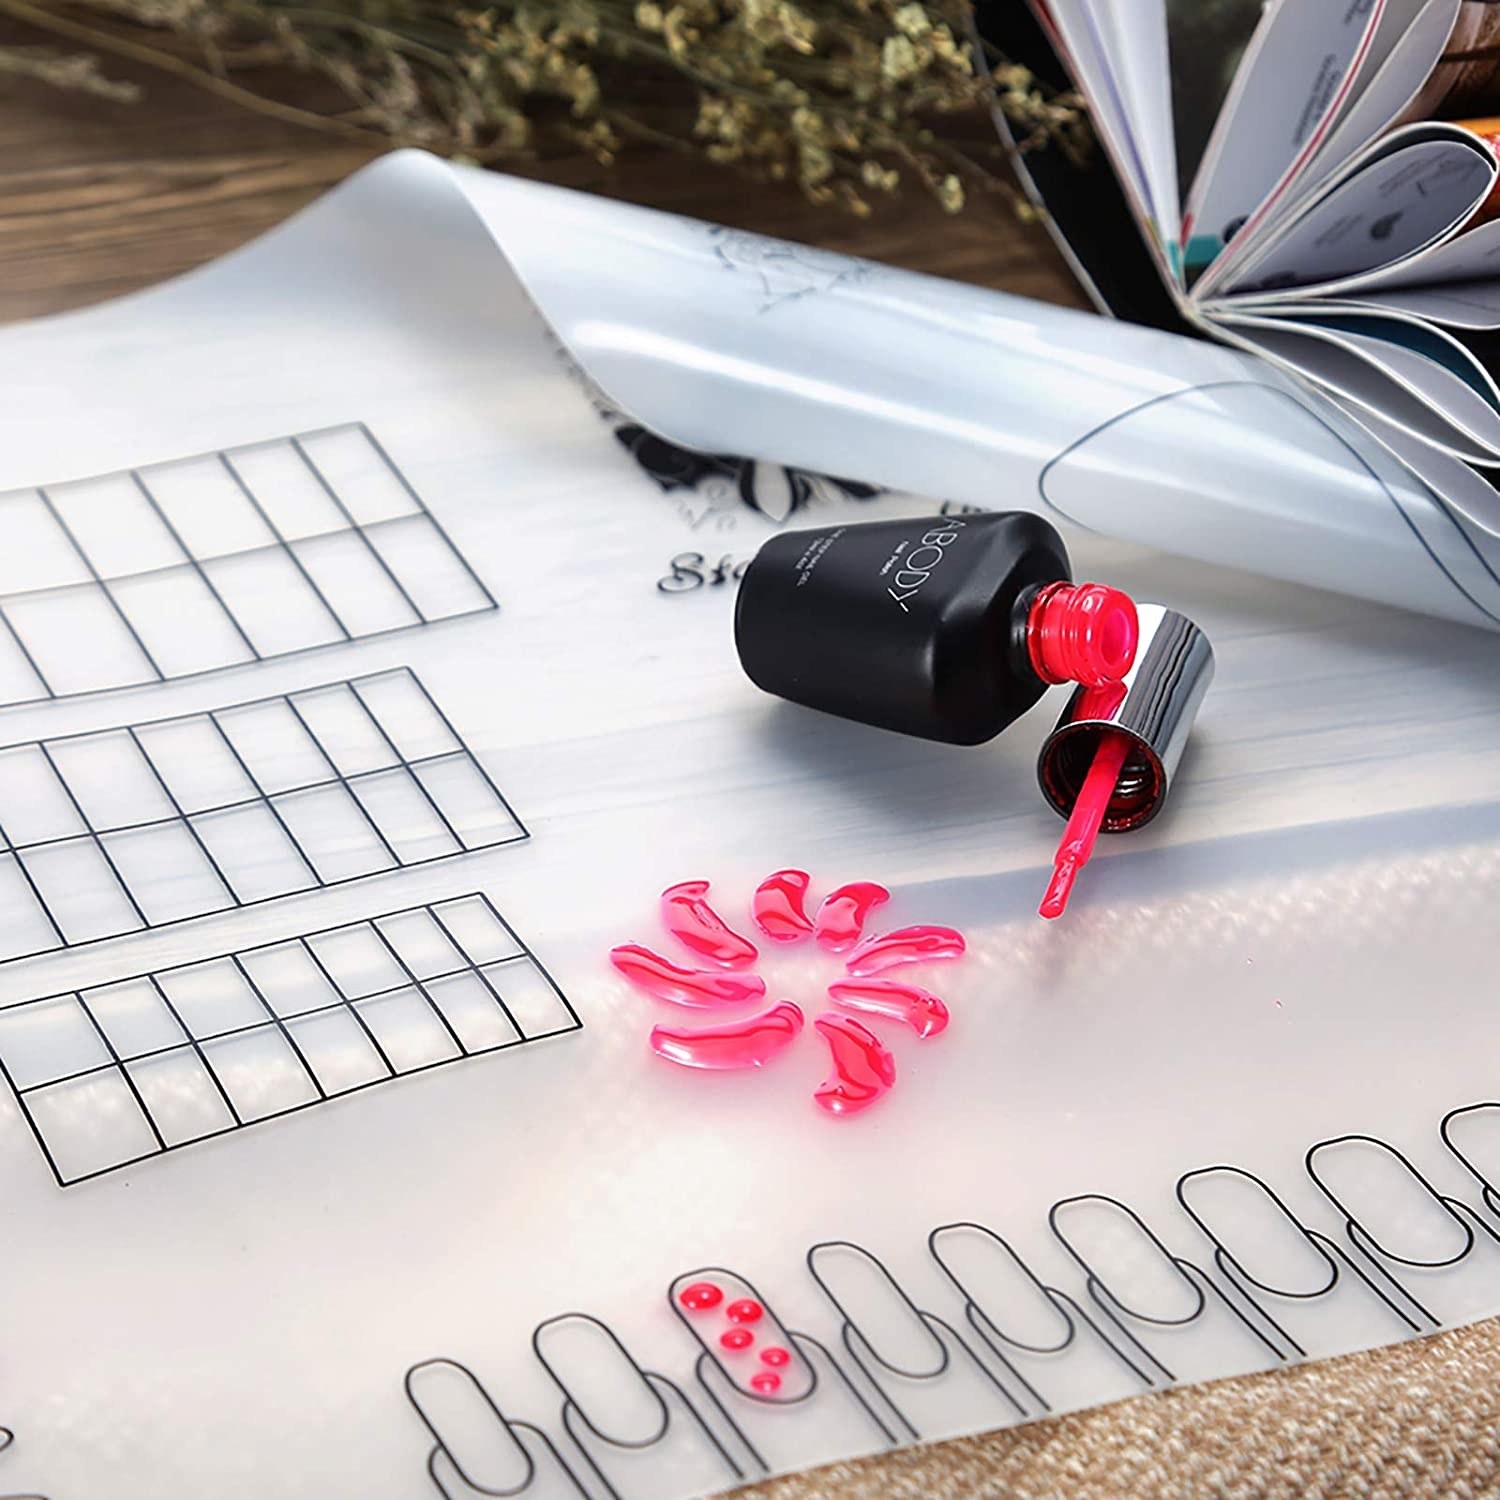 An open bottle of nail polish on the nail design pad